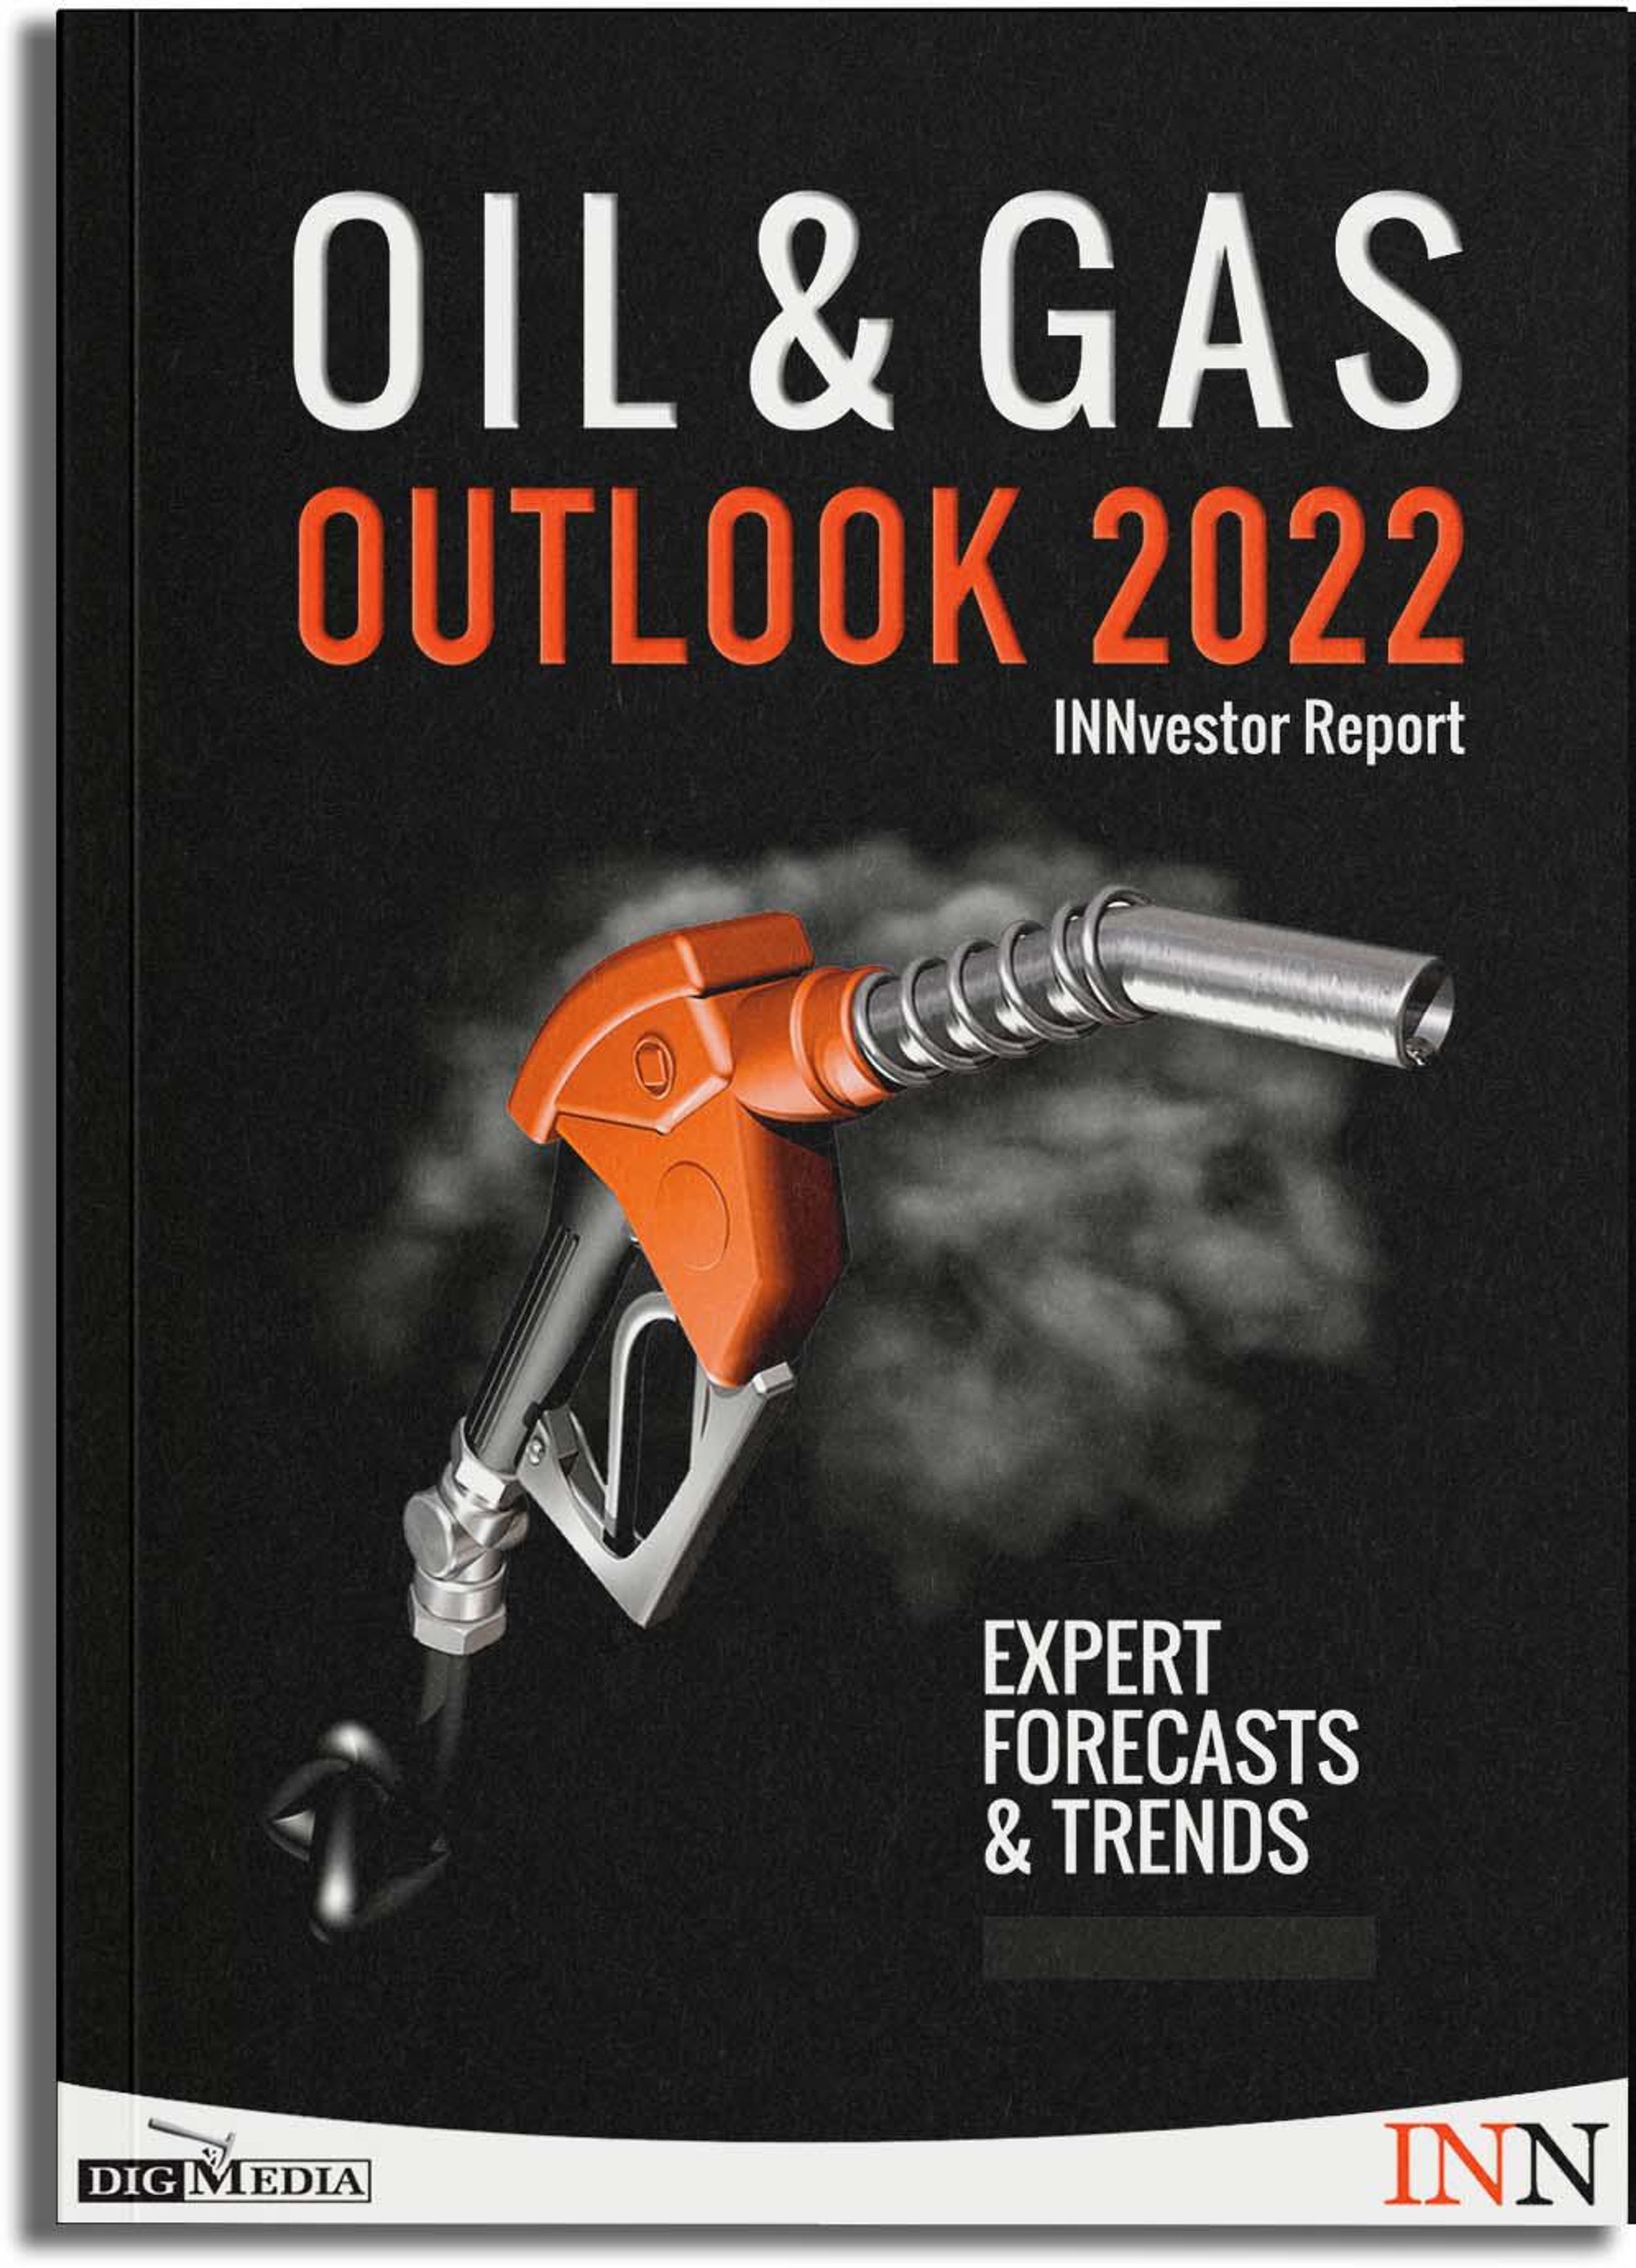 NEW! Download Your 2022 Oil & Gas Outlook Report.